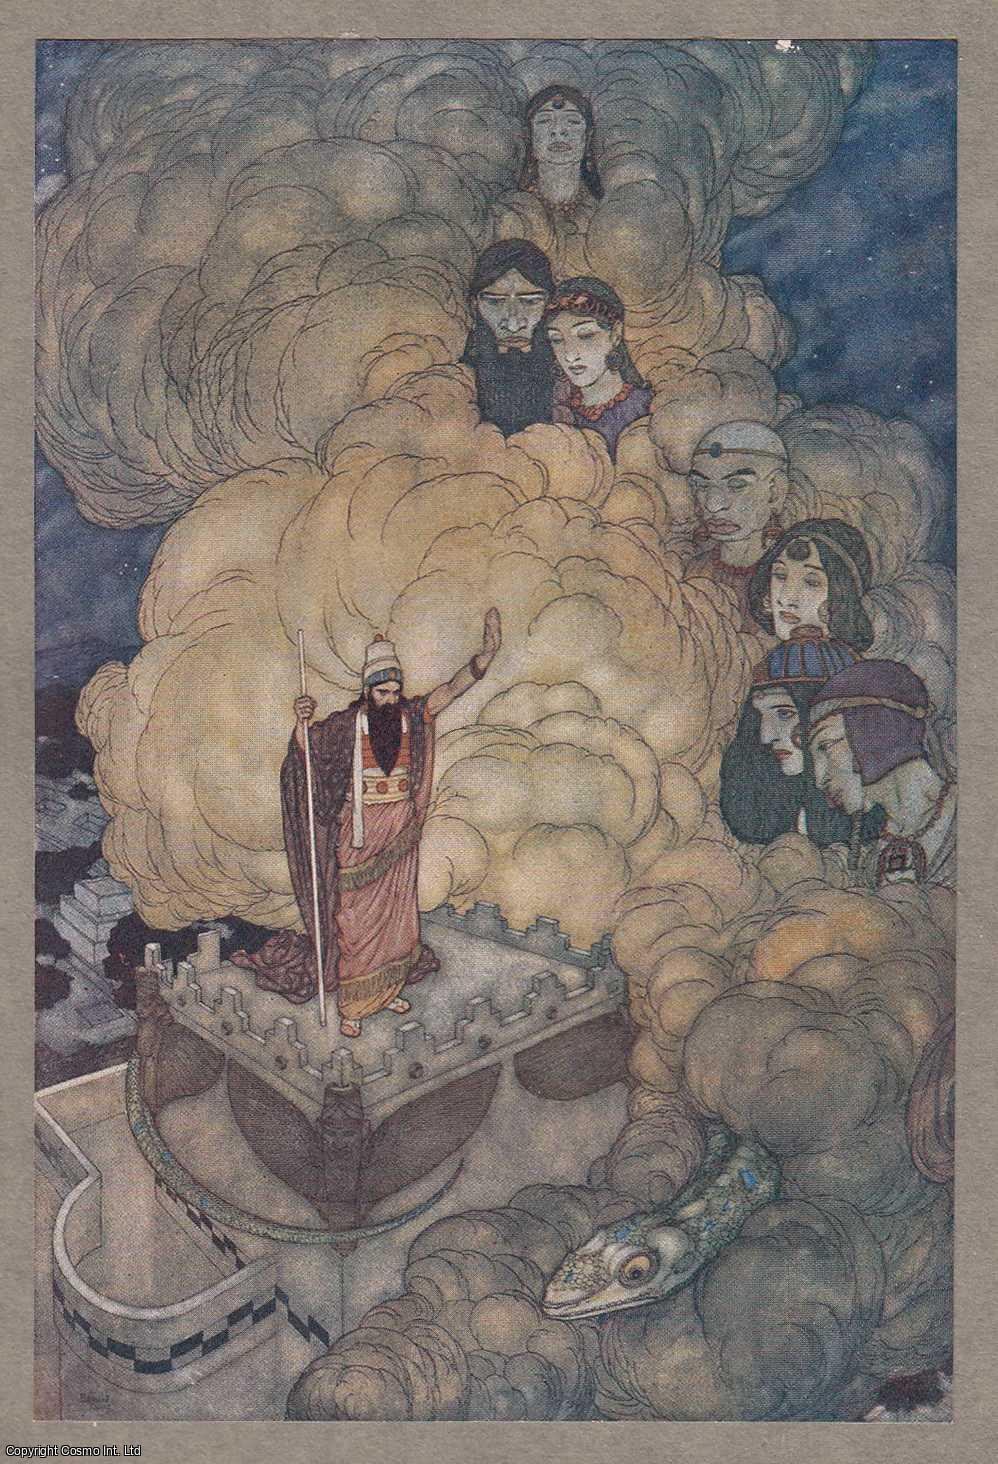 Edmund Dulac - Edmund Dulac: When having brought into submission all the rest of my race. An original colour print, c.1907 from the work Arabian Nights.